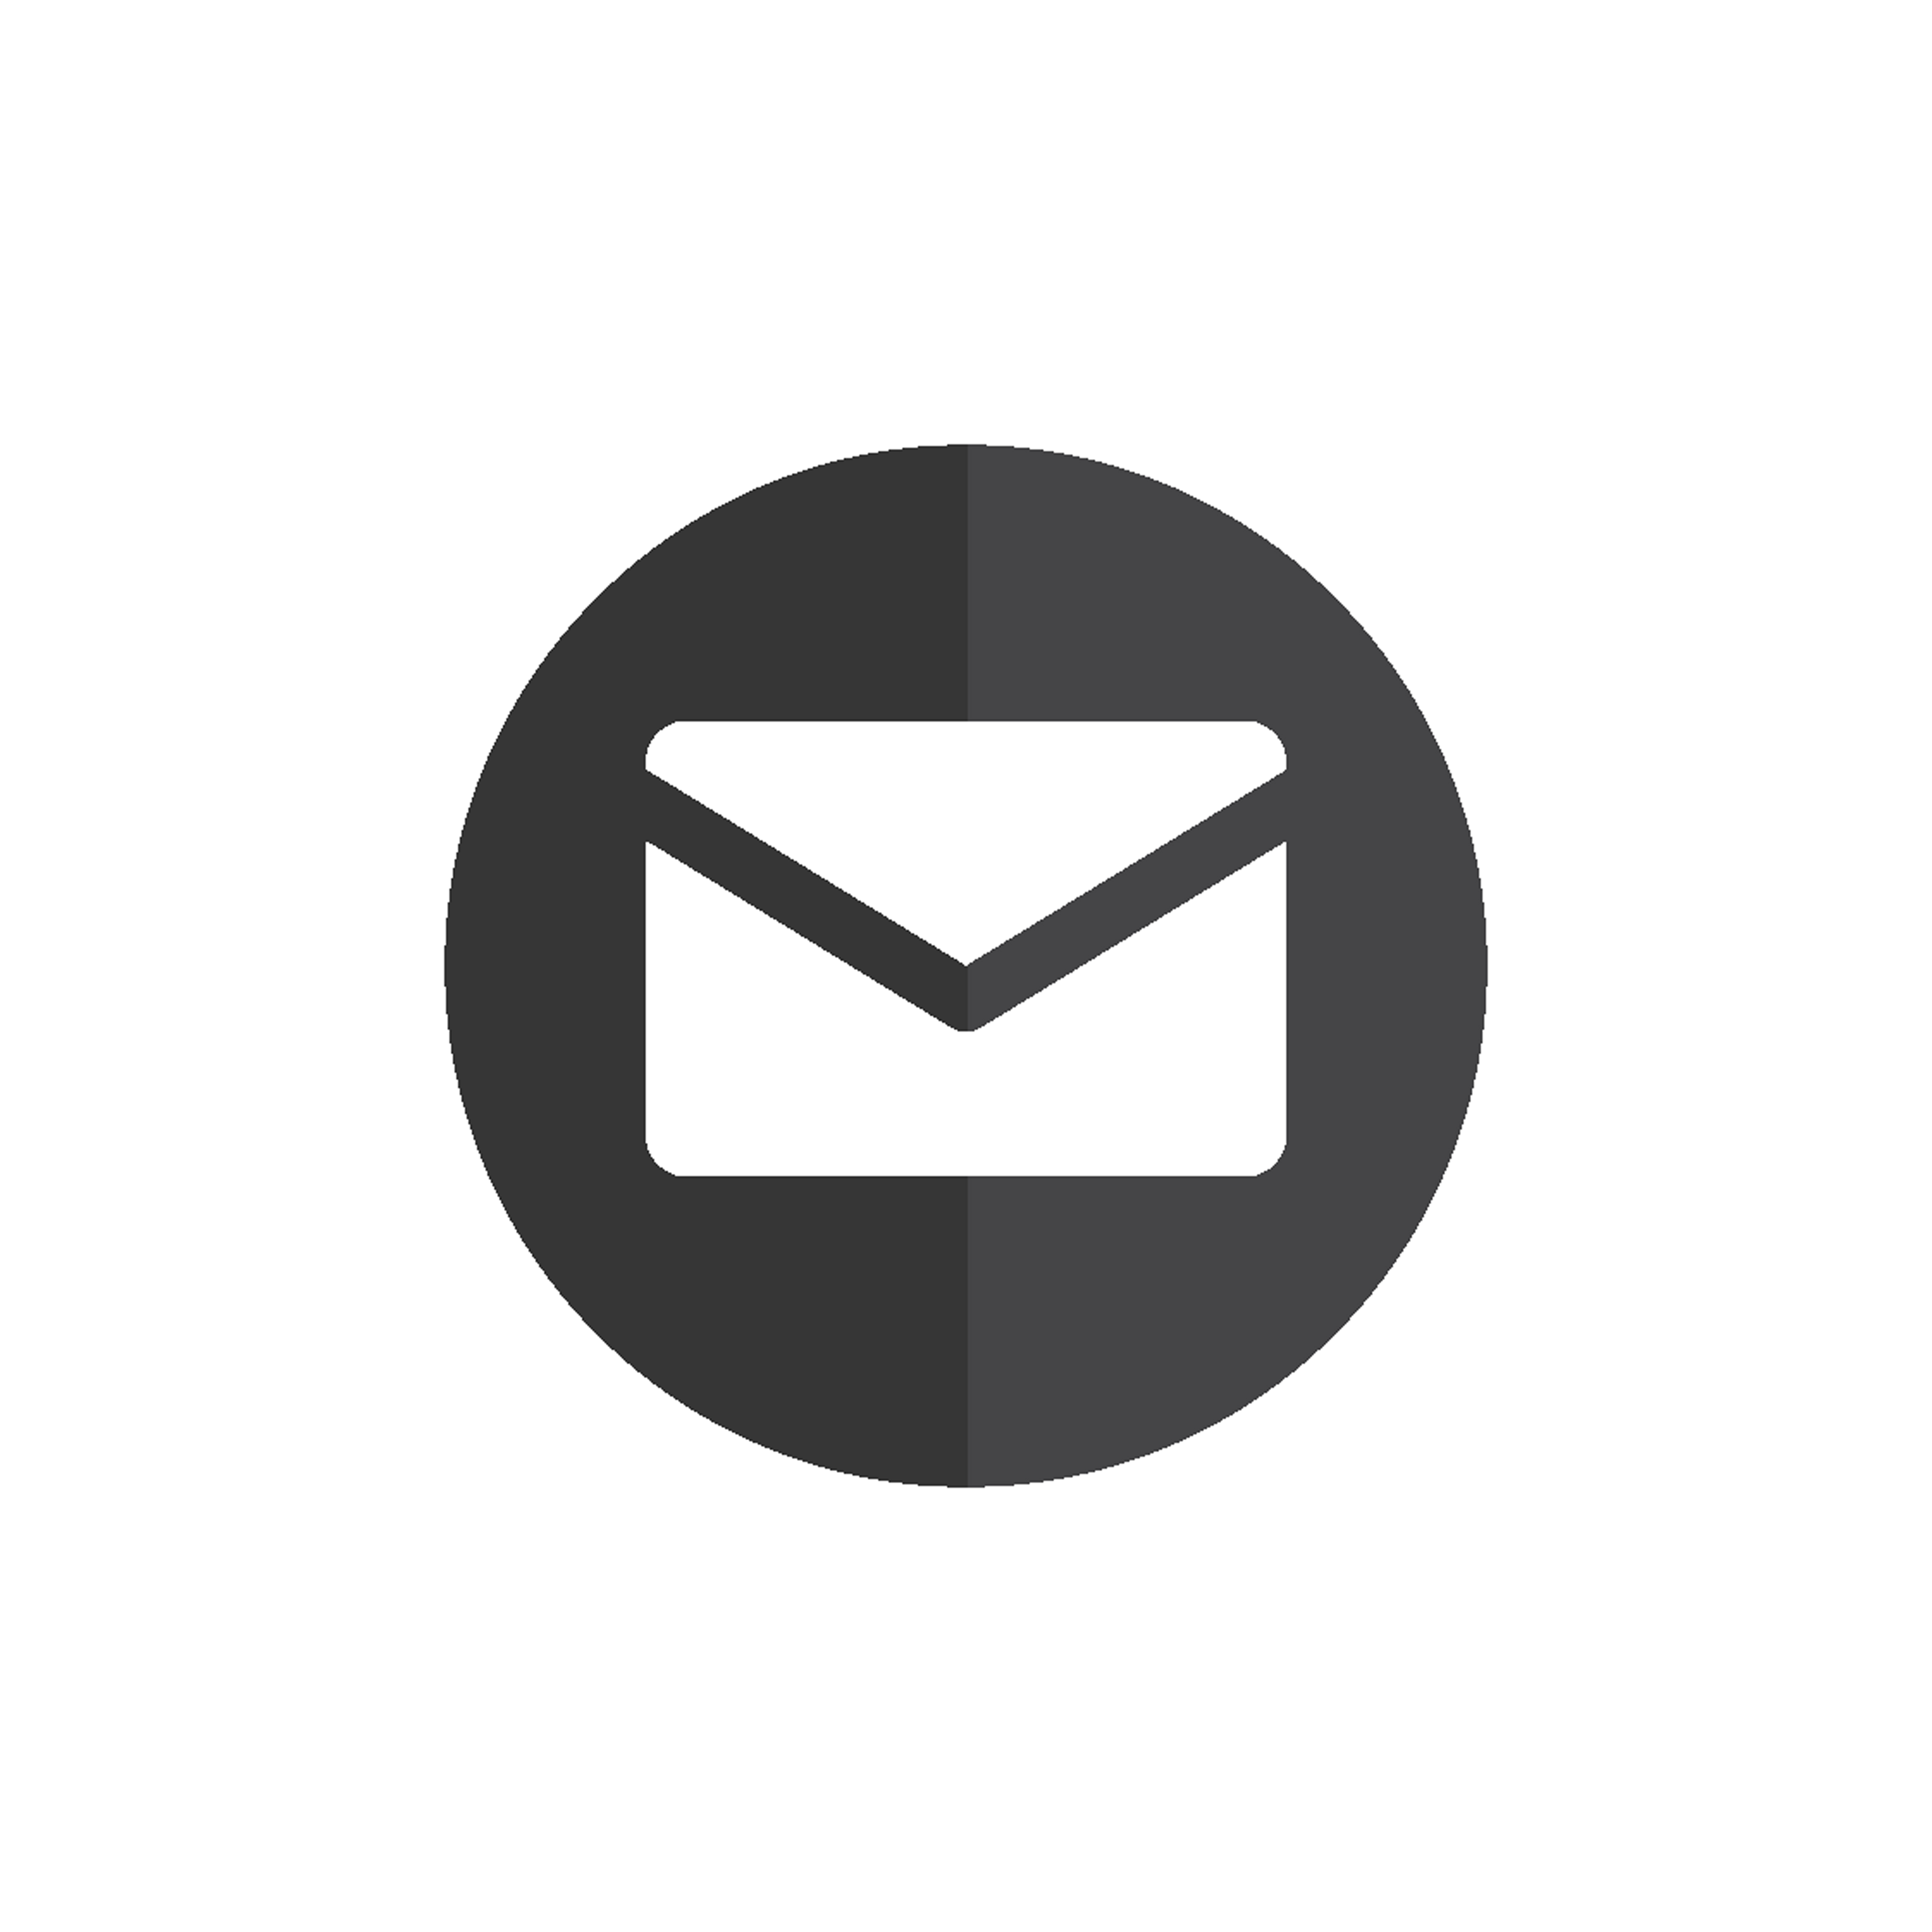 Illustration of mail icon Download Free Vectors, Clipart